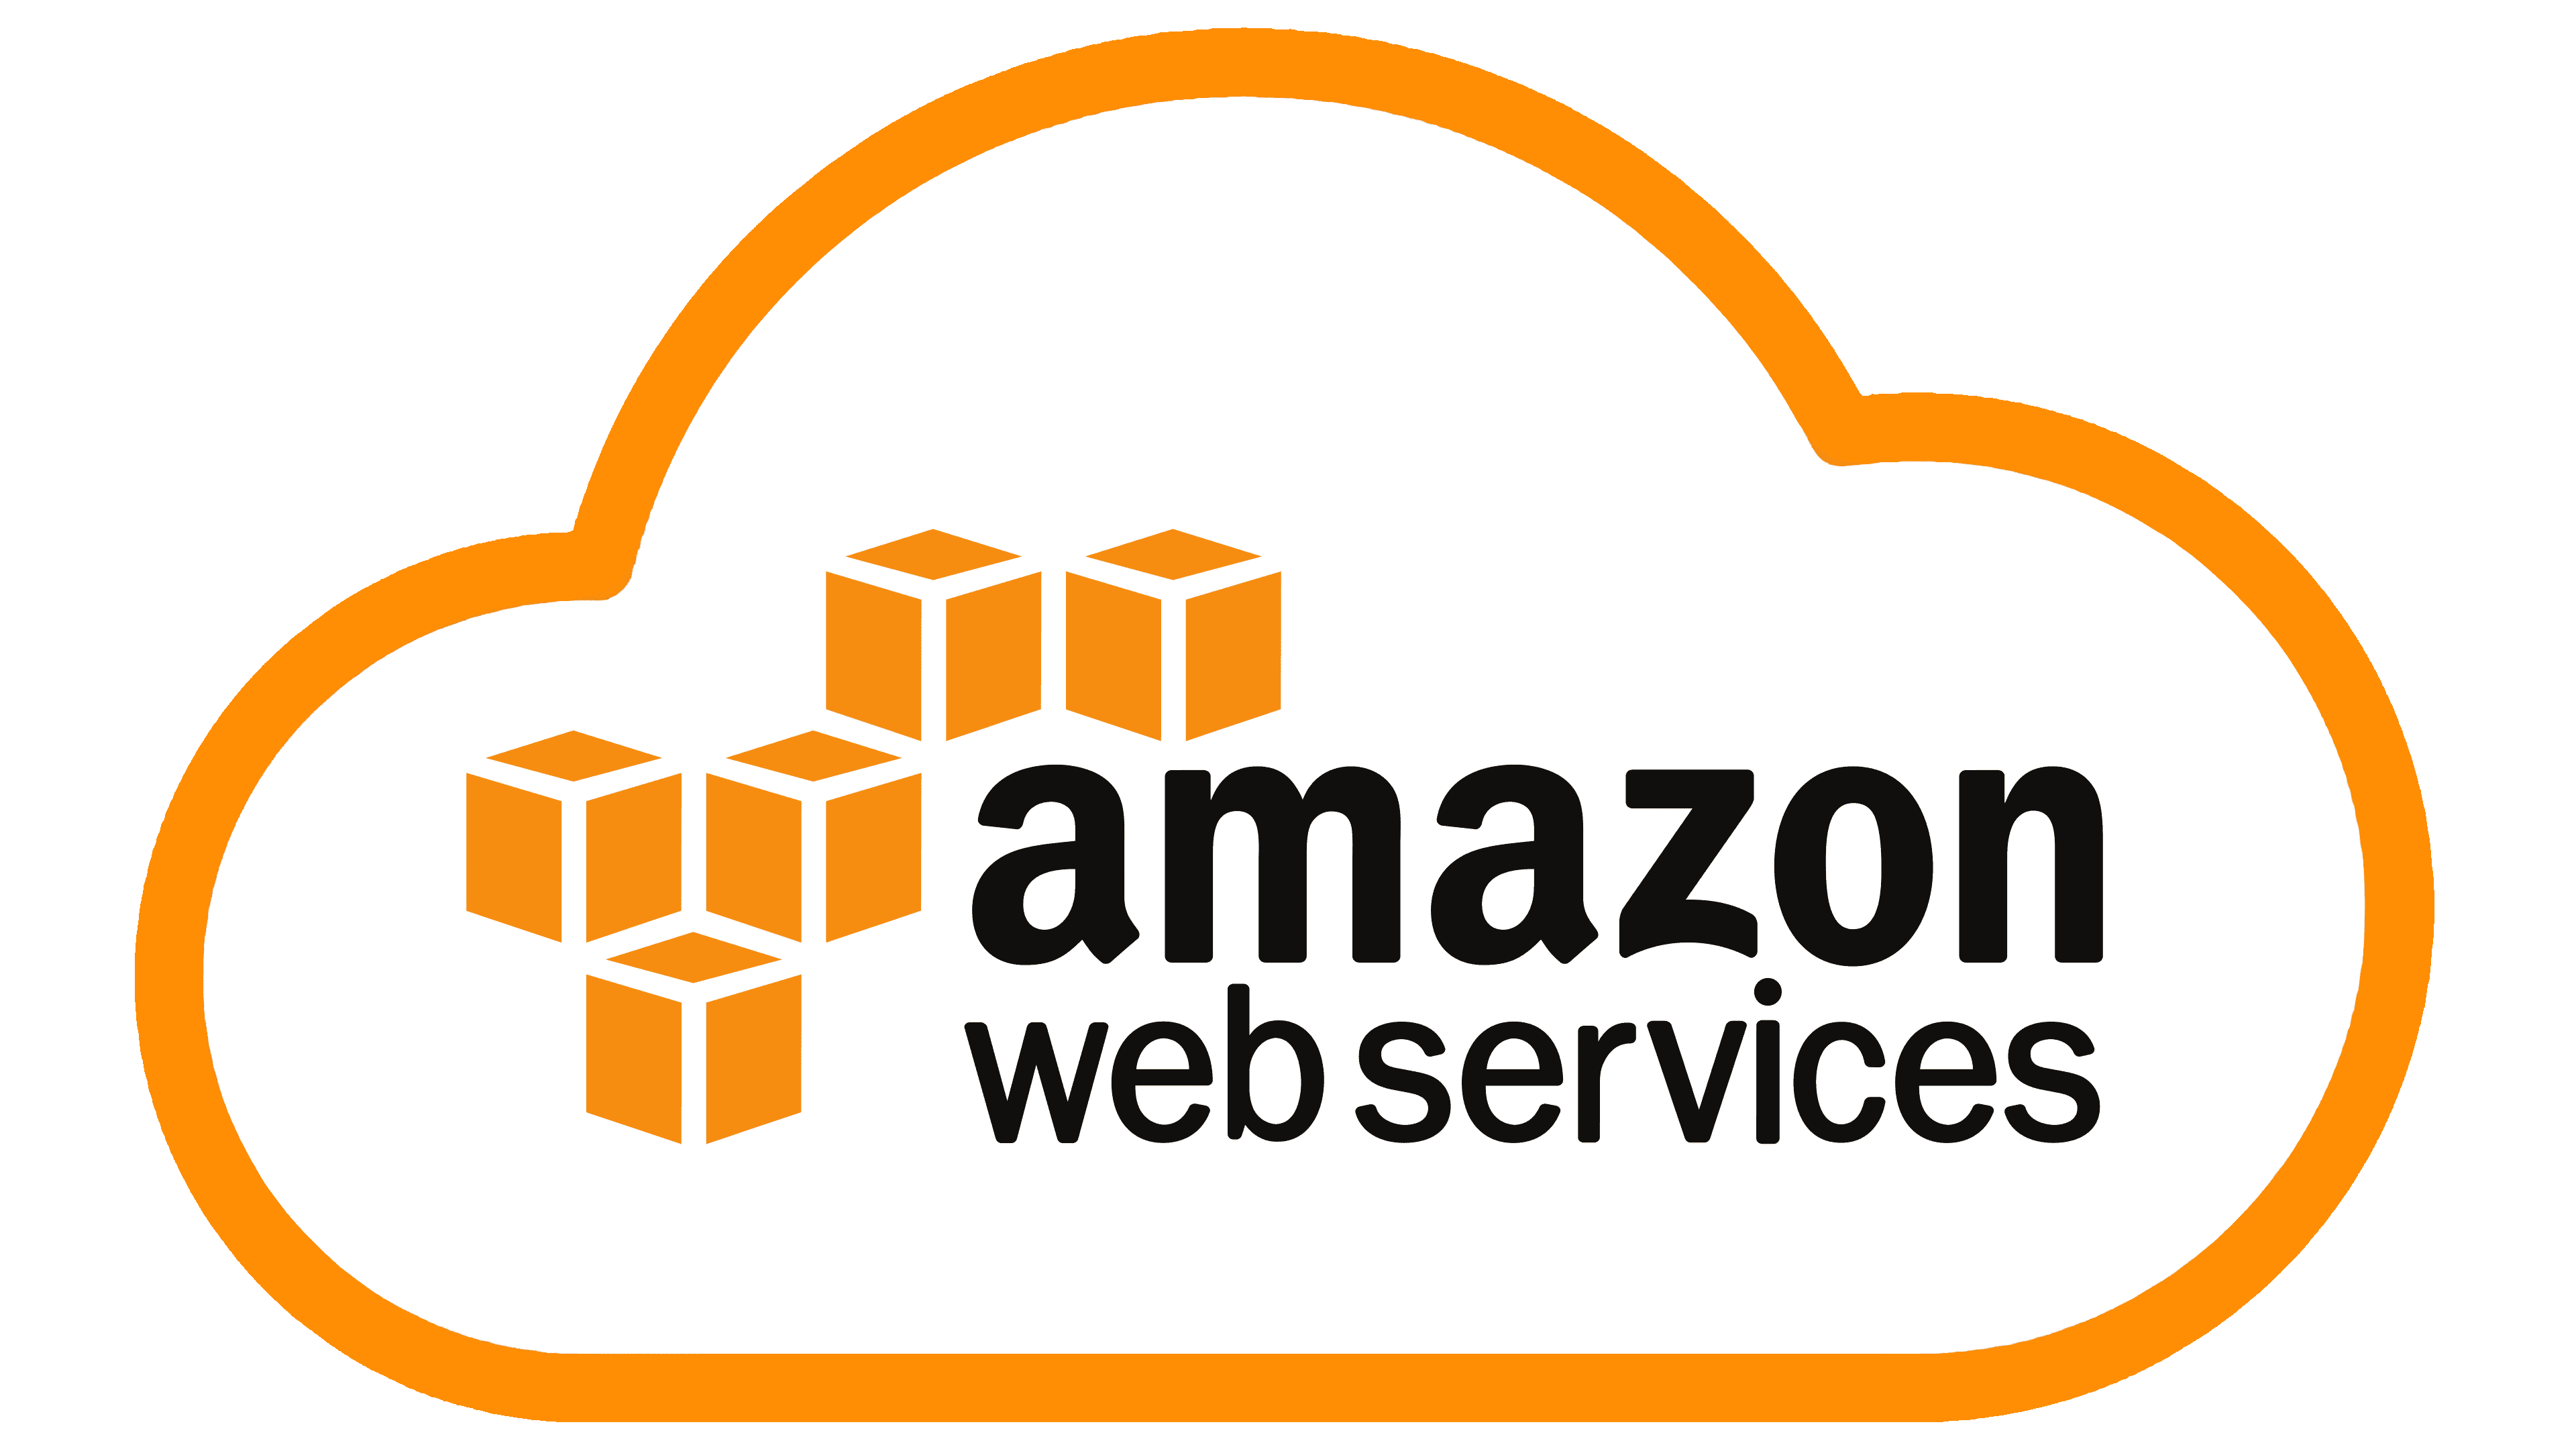 AWS Devops Certification Dumps How difficult is AWS? Read More